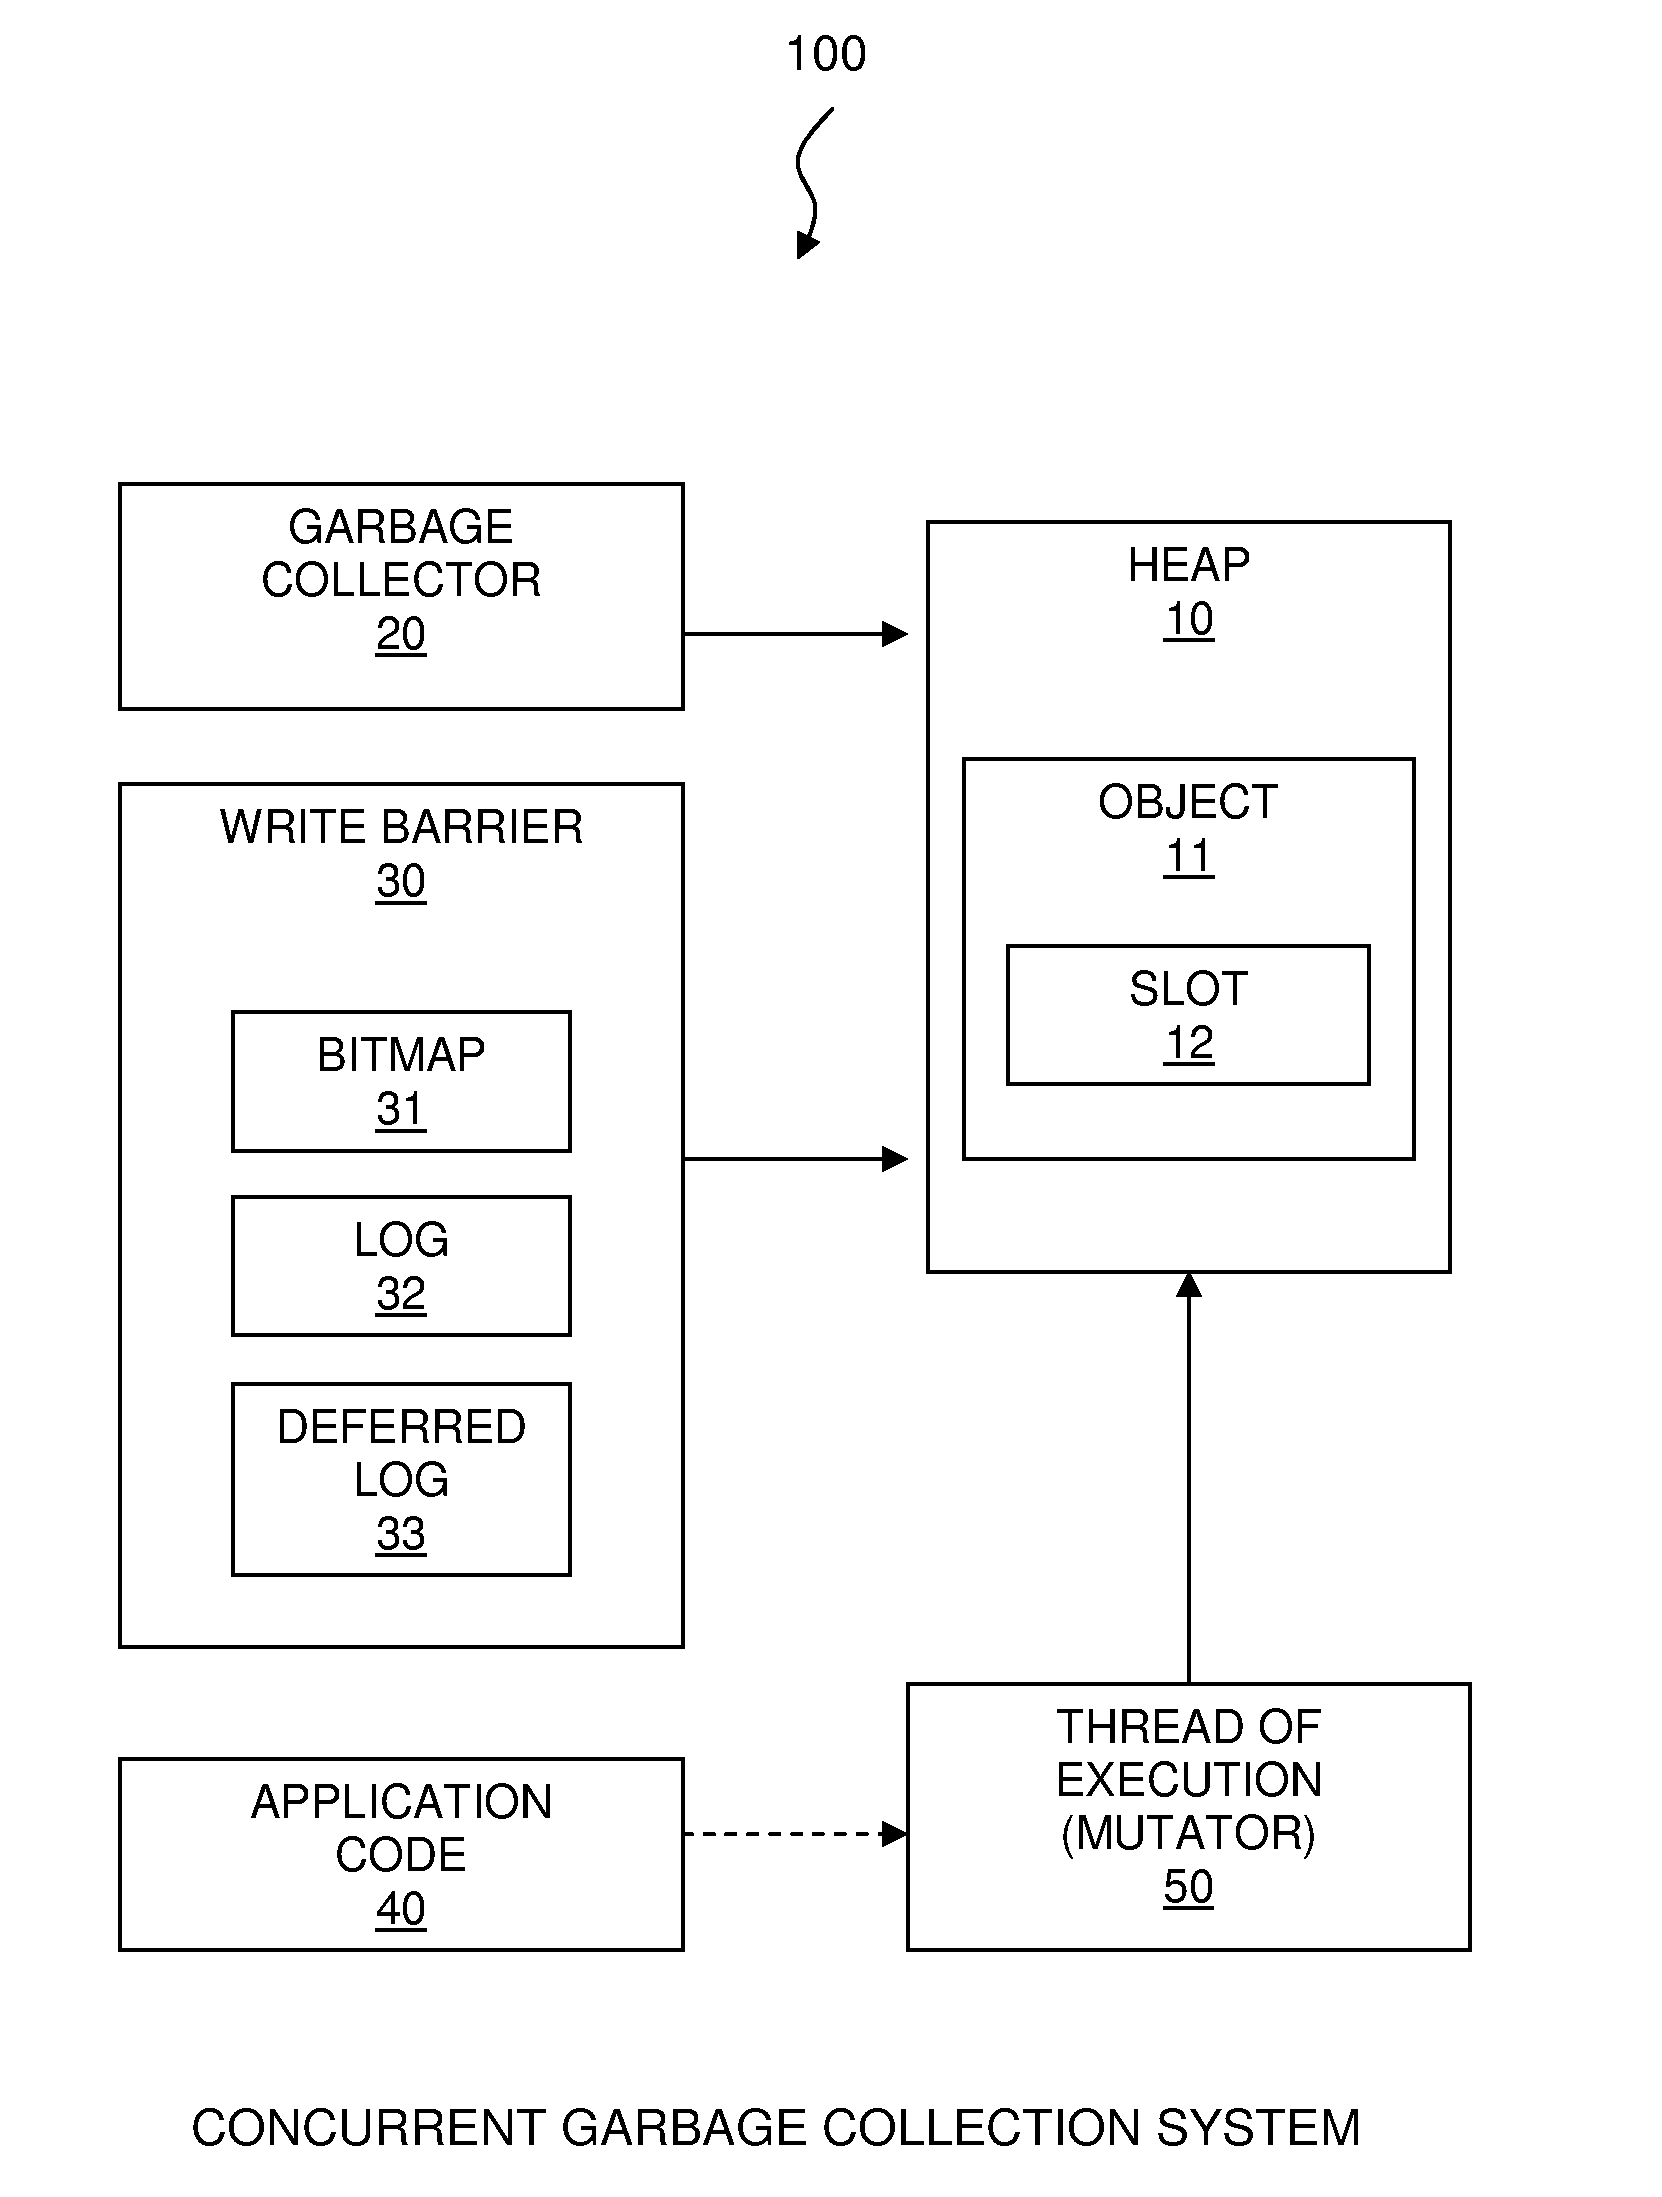 System and method for optimizing write barrier in garbage collection